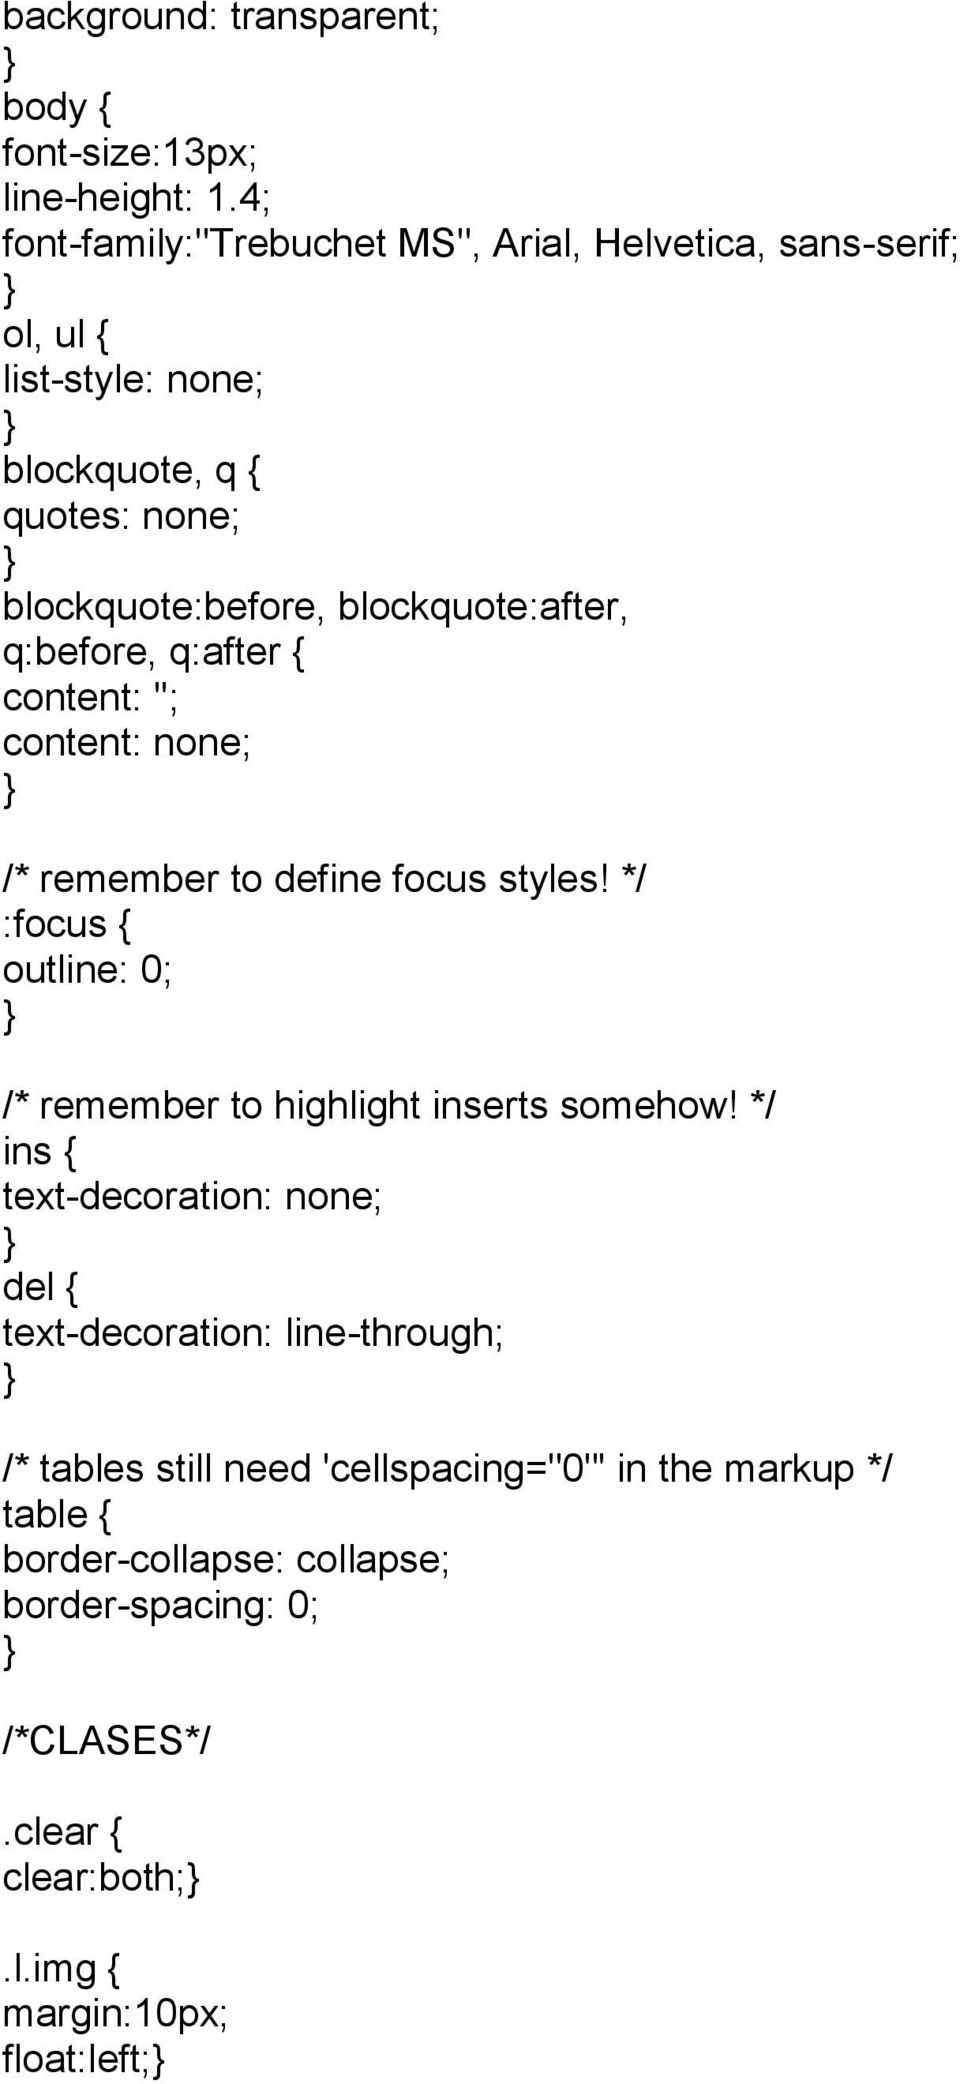 blockquote:after, q:before, q:after { content: ''; content: none; /* remember to define focus styles!